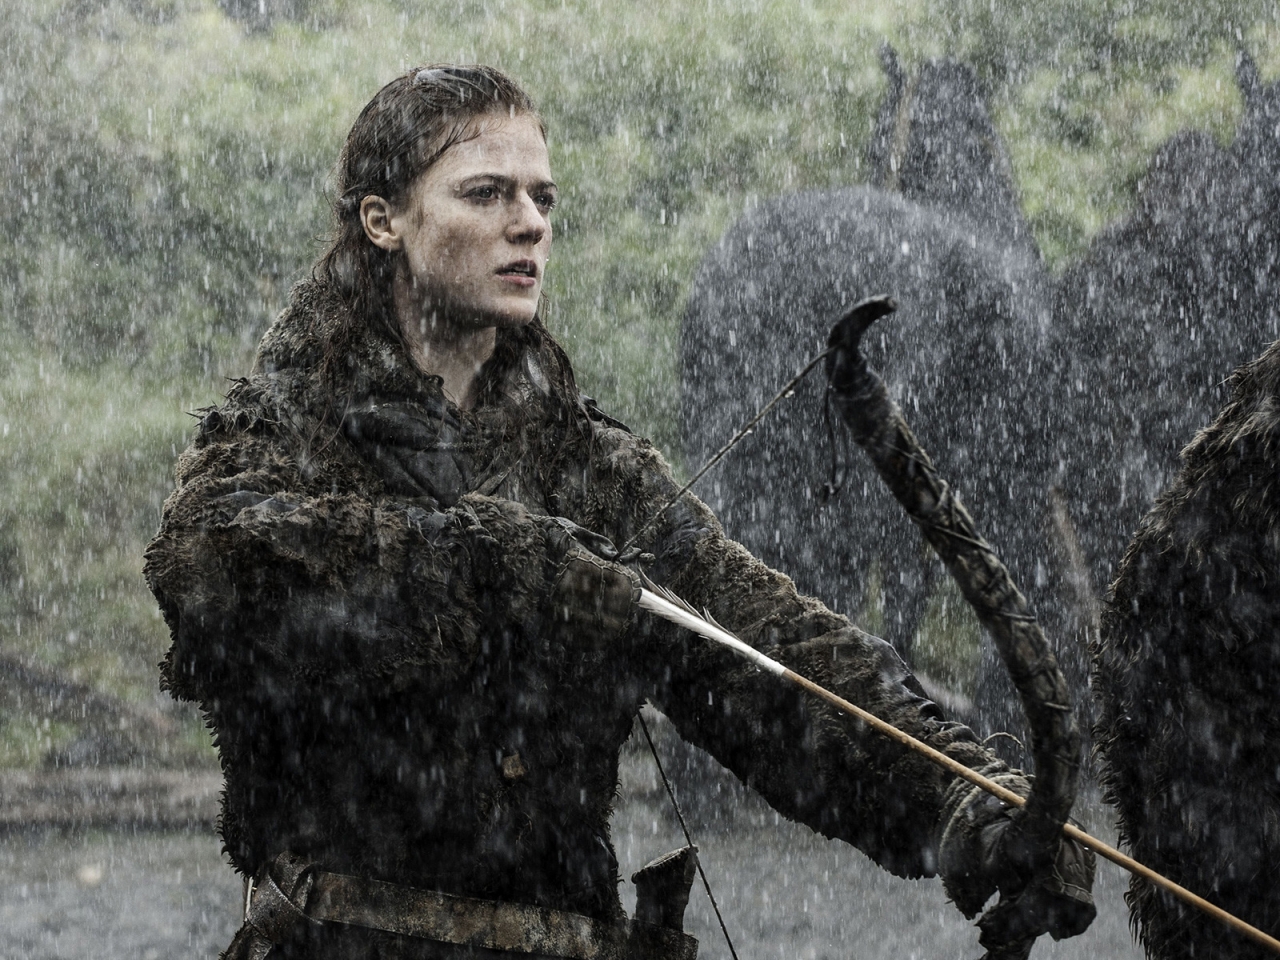 Ygritte from Game of Thrones for 1280 x 960 resolution